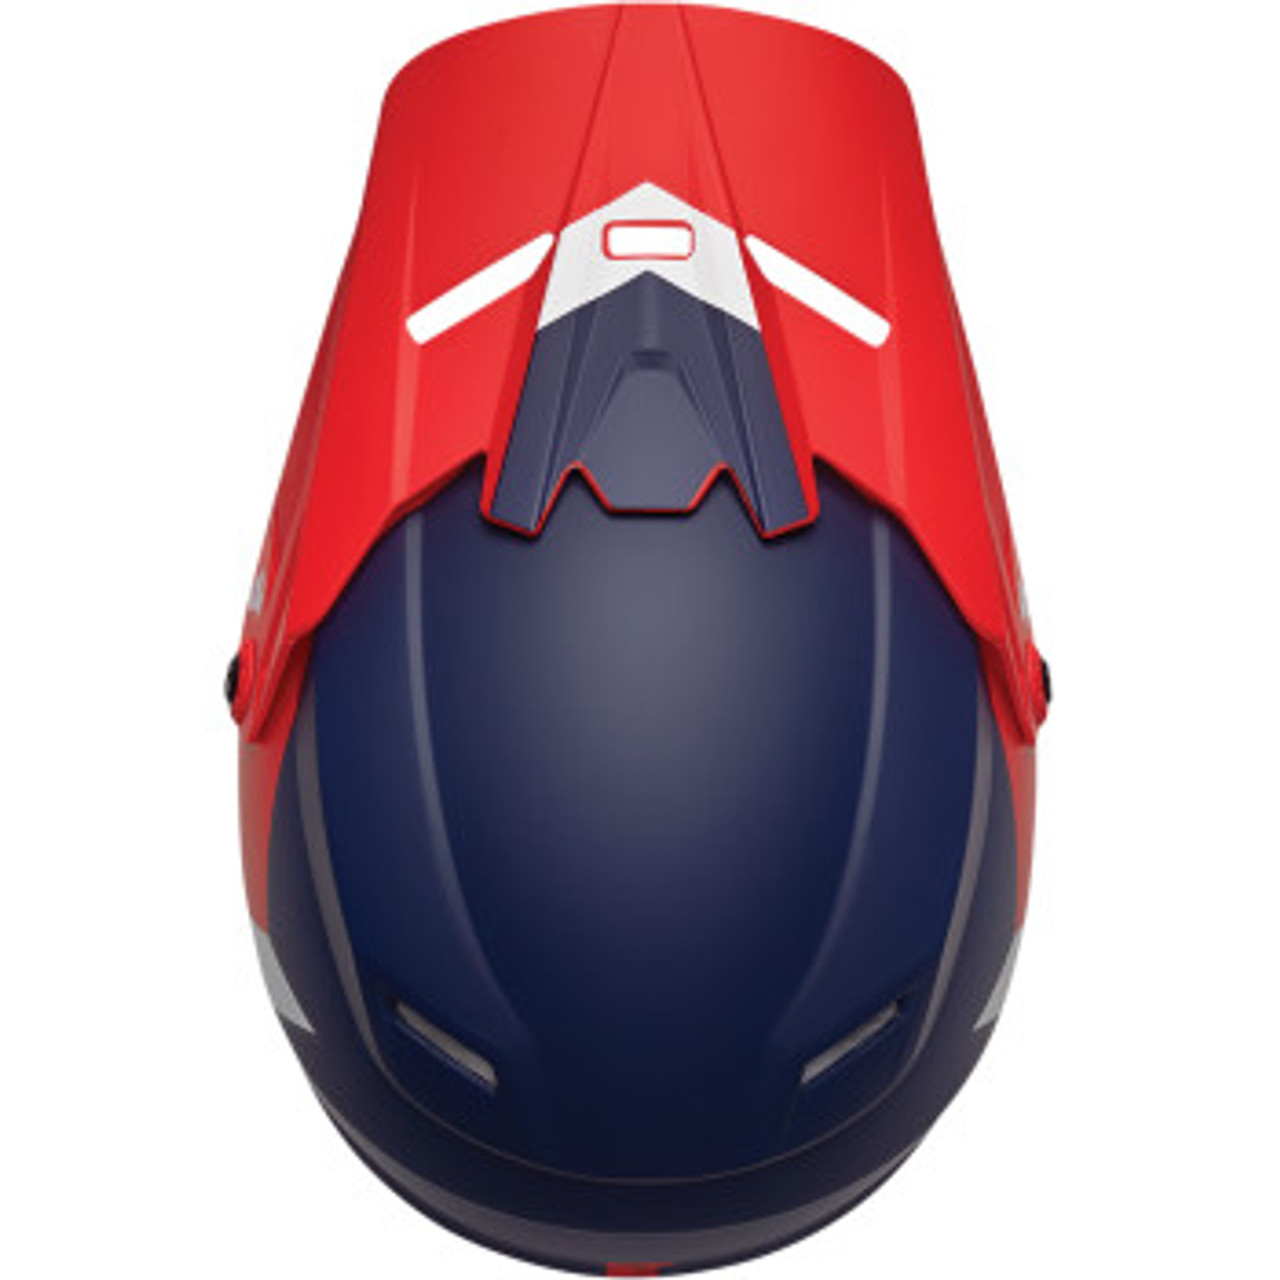 THOR Youth Sector Helmet - Chev - Red/Navy